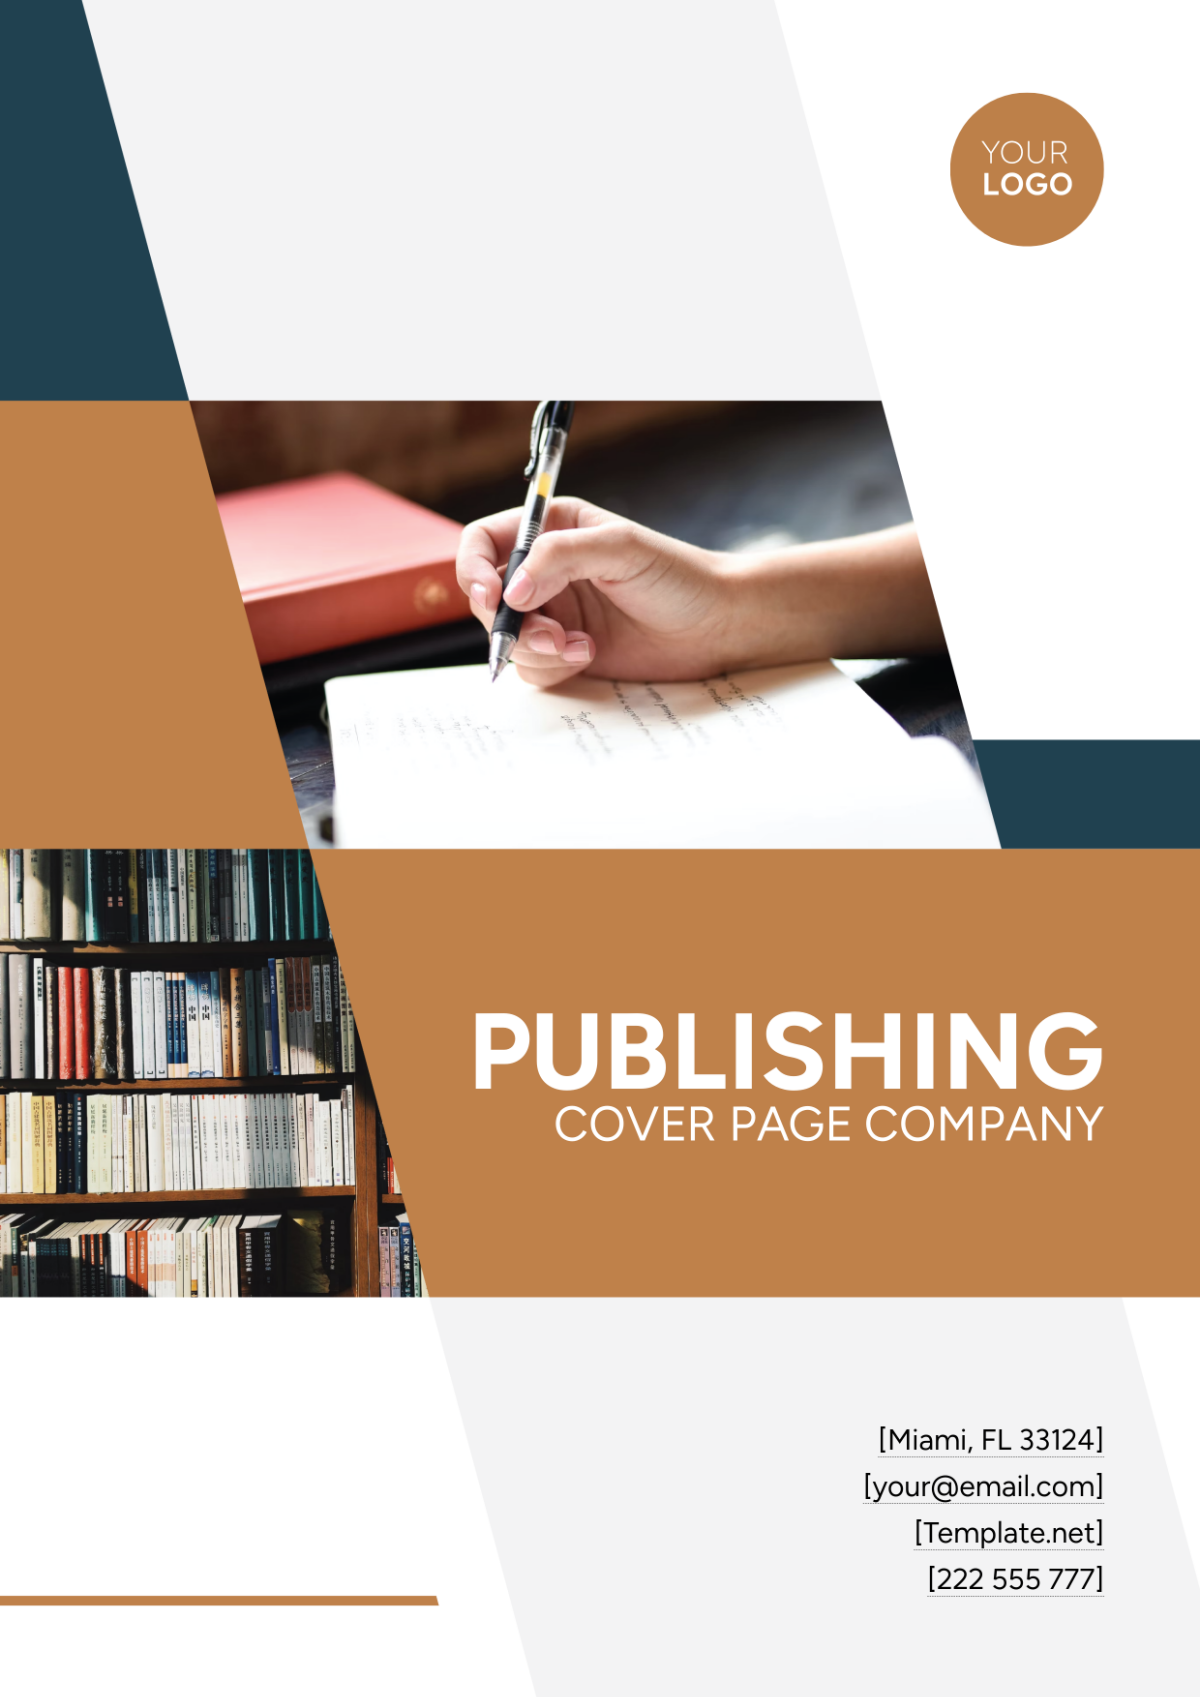 Publishing Cover Page Company Template